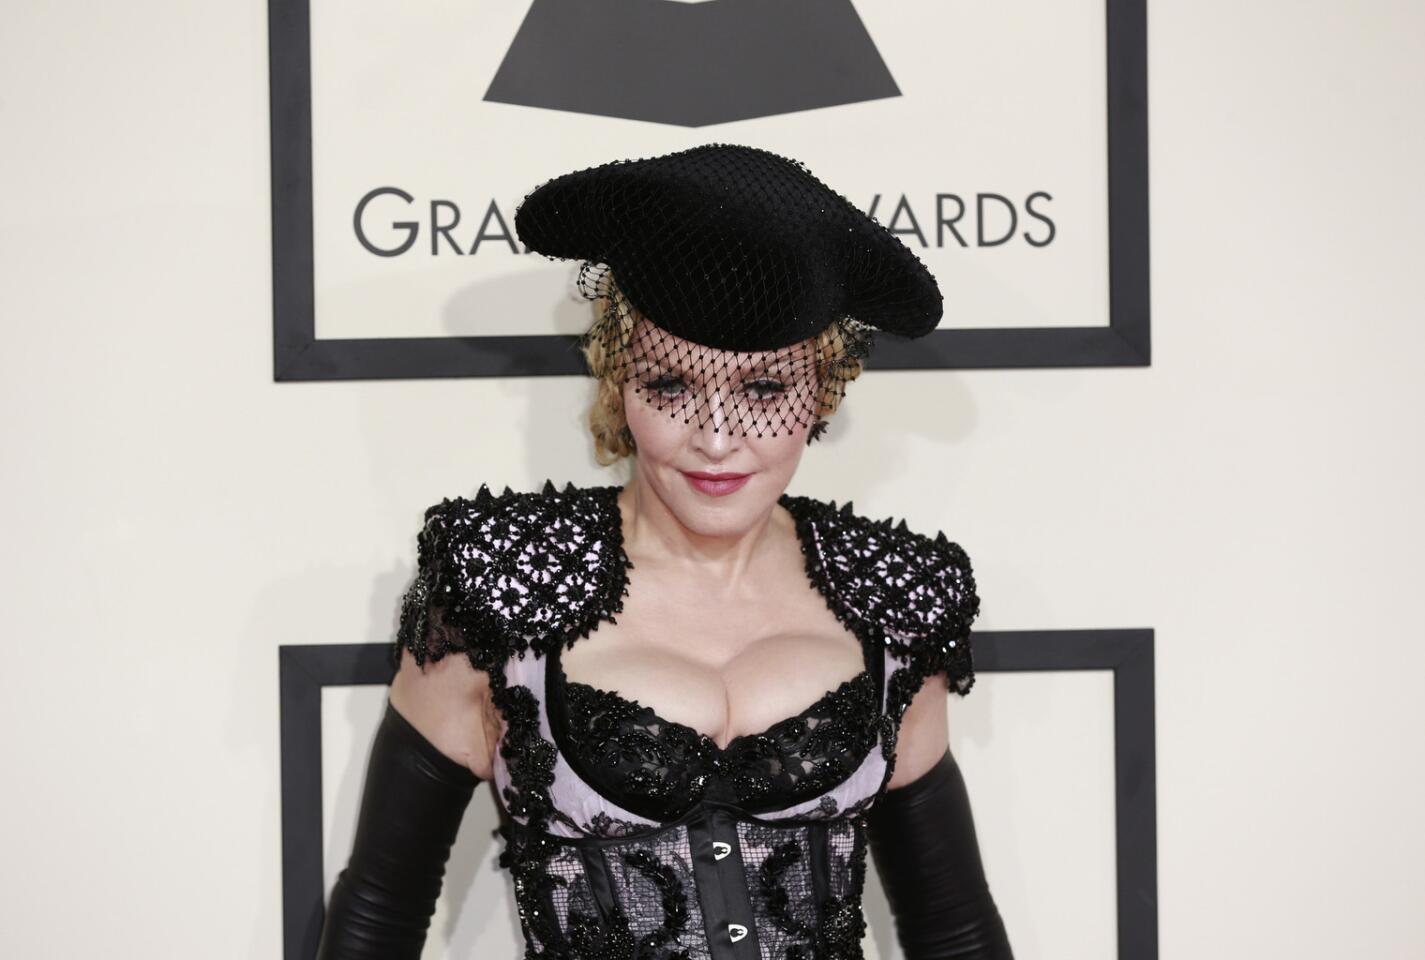 Cleavage overload at the Grammys